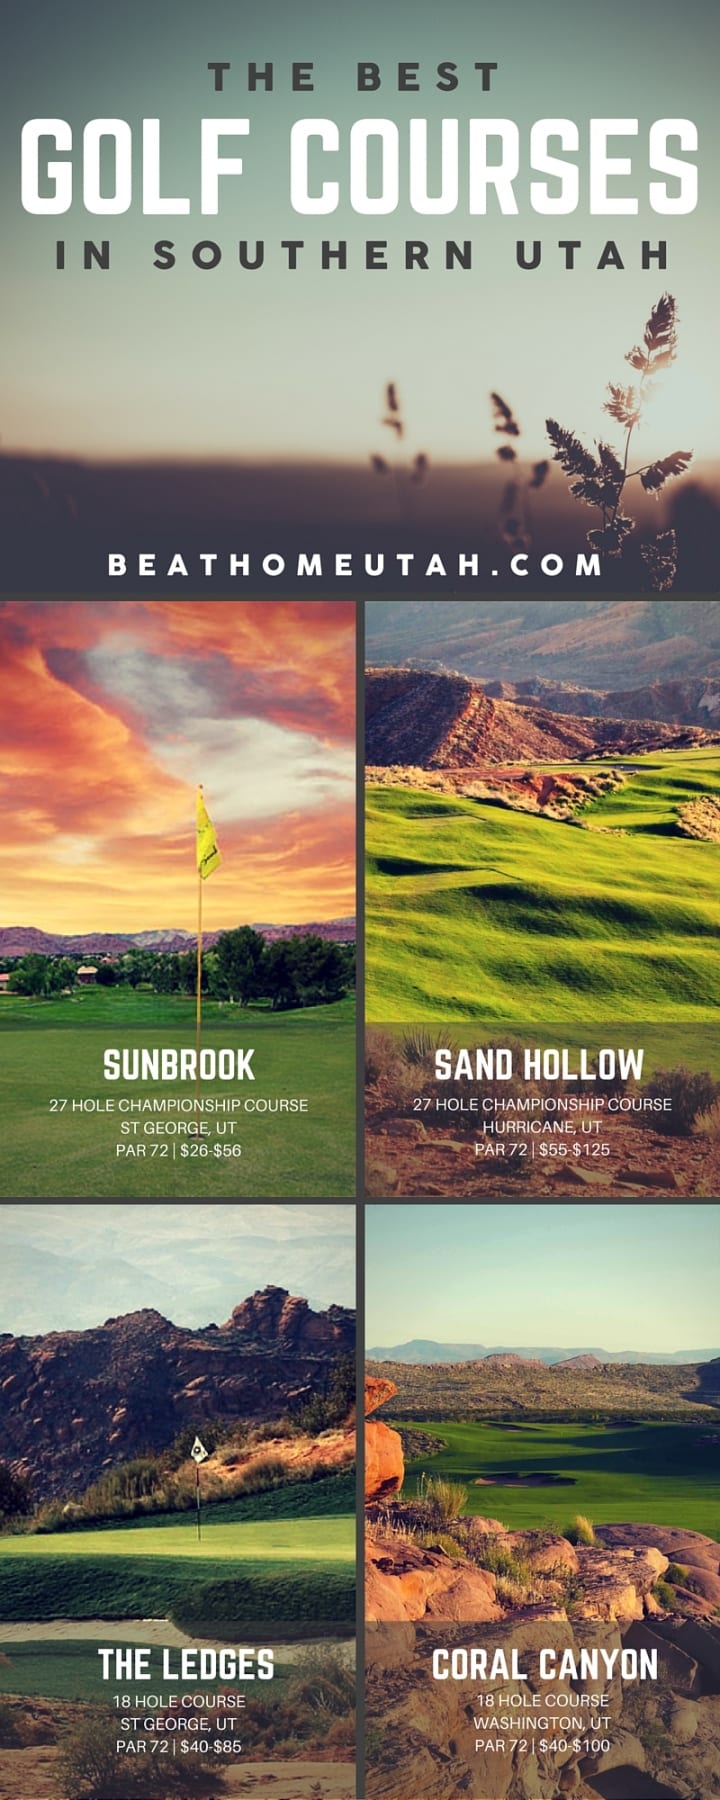 the best golf courses in st george